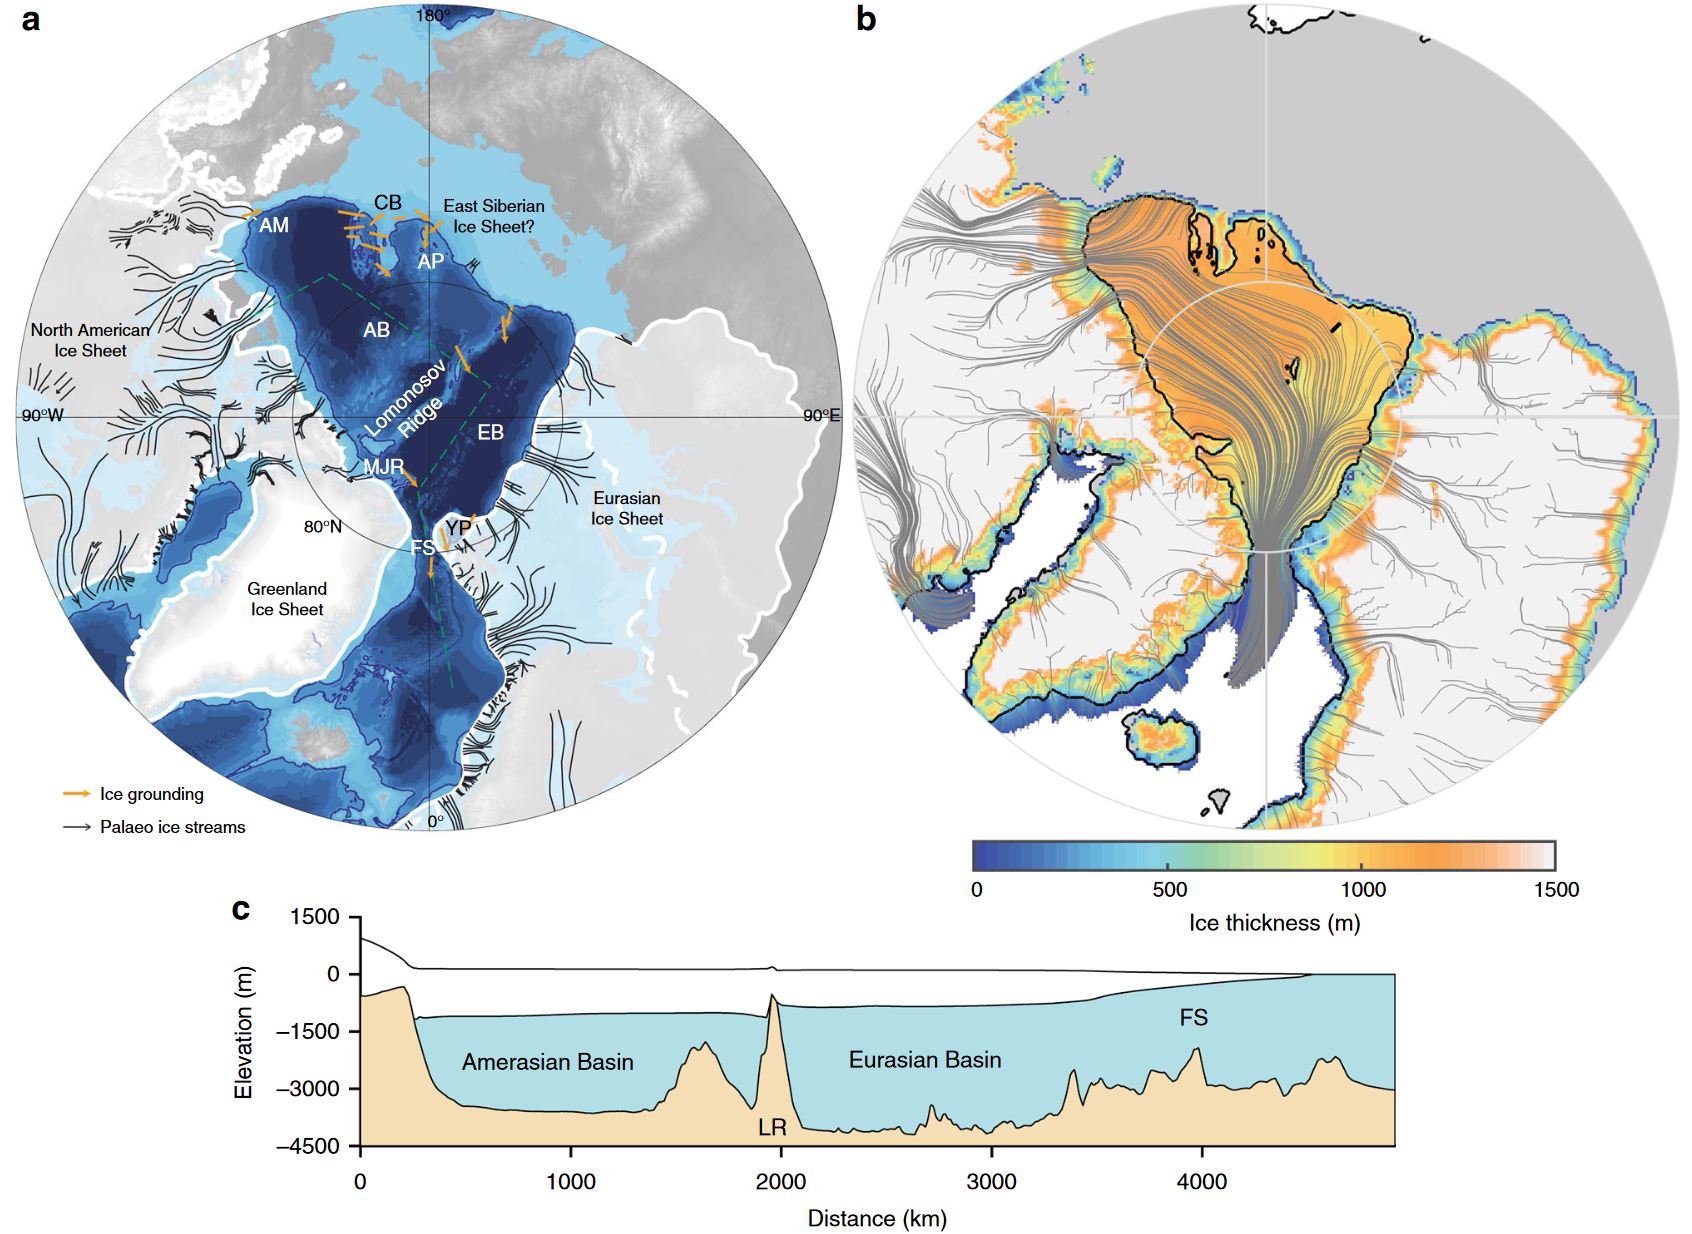 Numerical simulations of a kilometre-thick Arctic ice shelf consistent with ice grounding observations